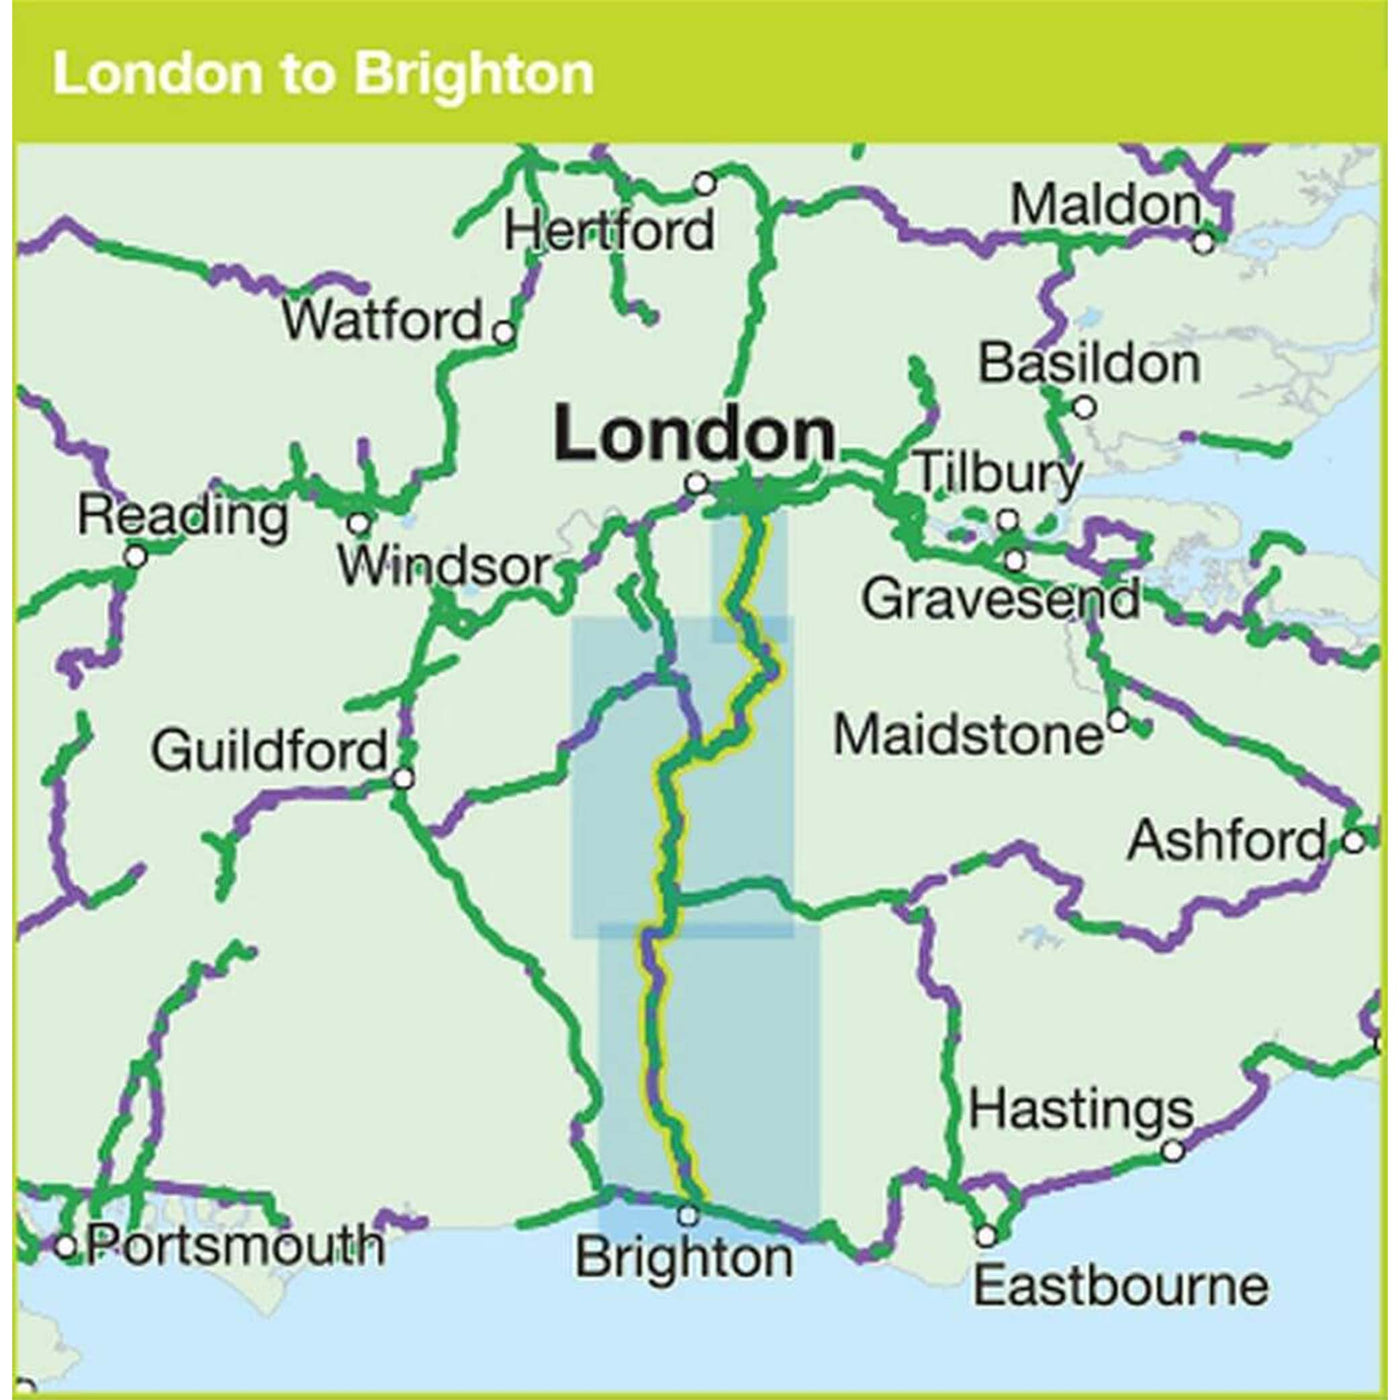 London to Brighton cycle route coverage